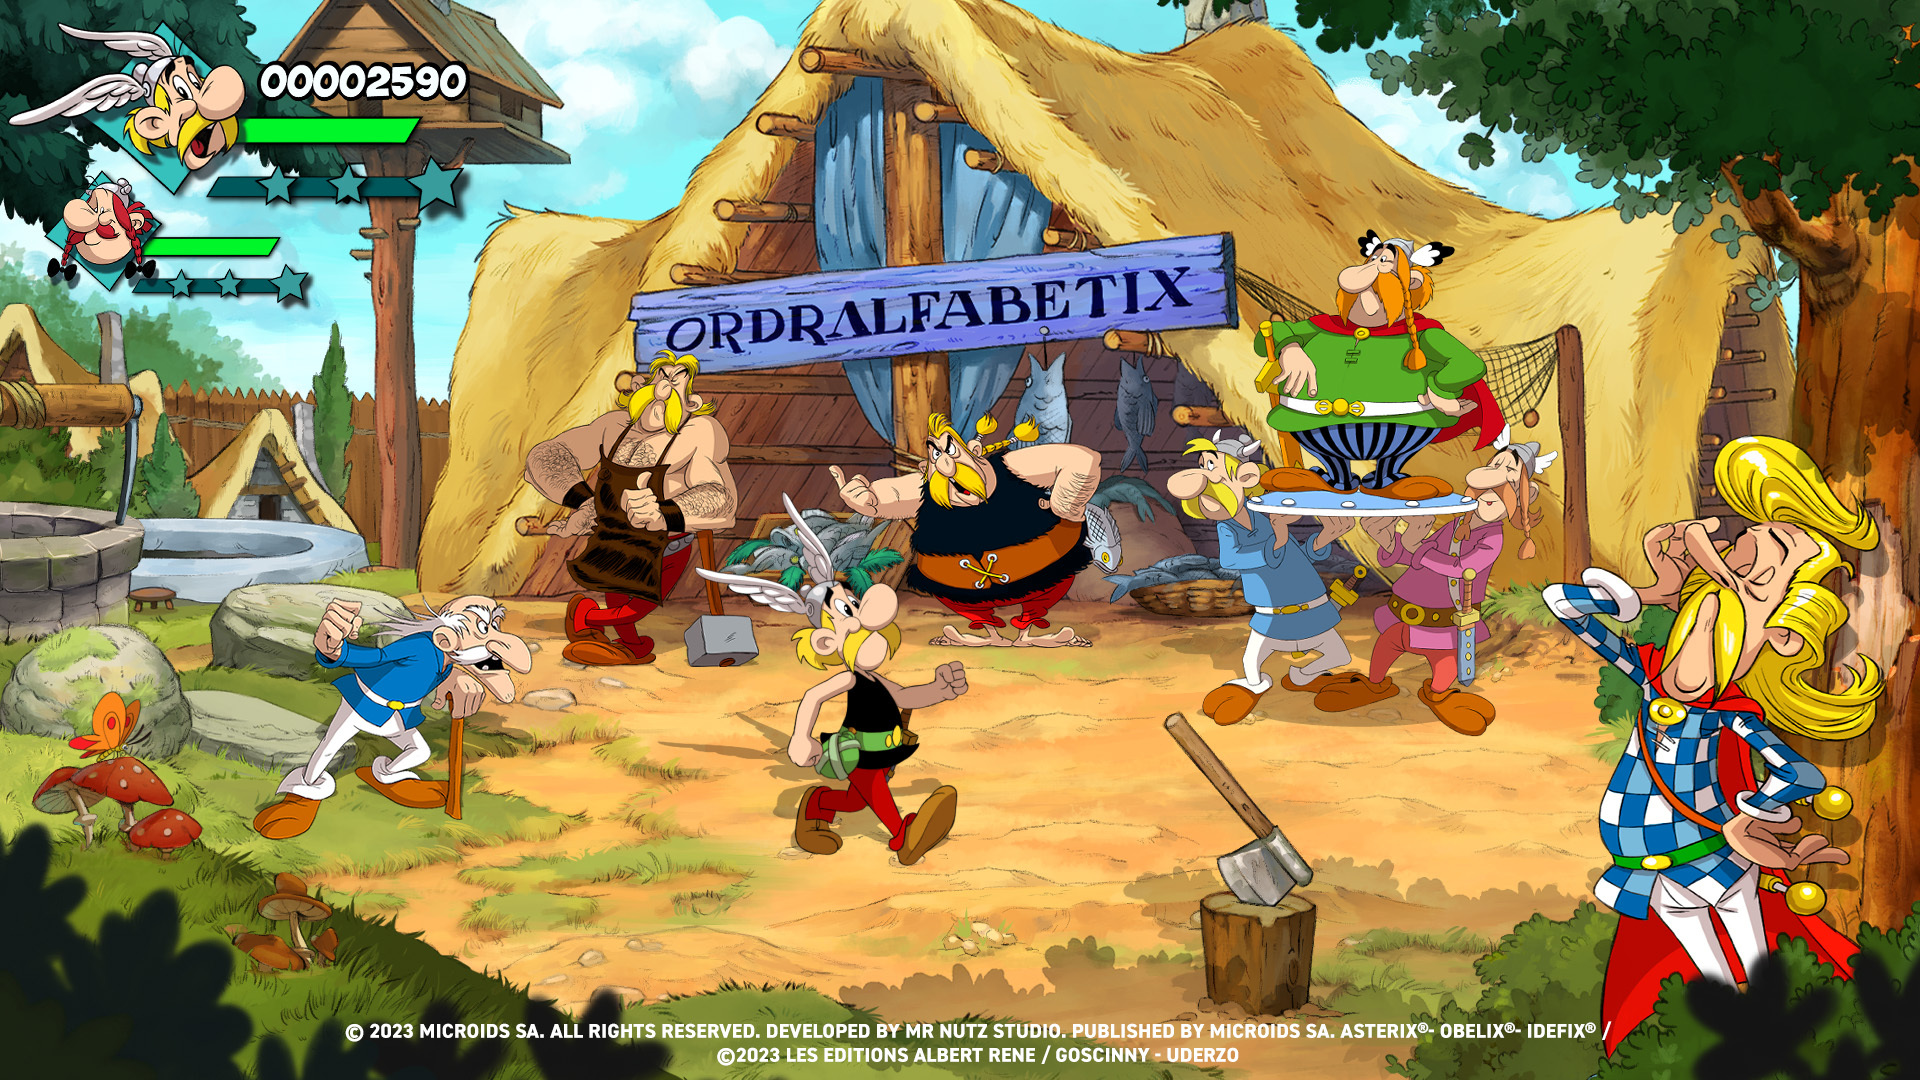 A screenshot of the campground in Asterix & Obelix: Slap Them All 2!